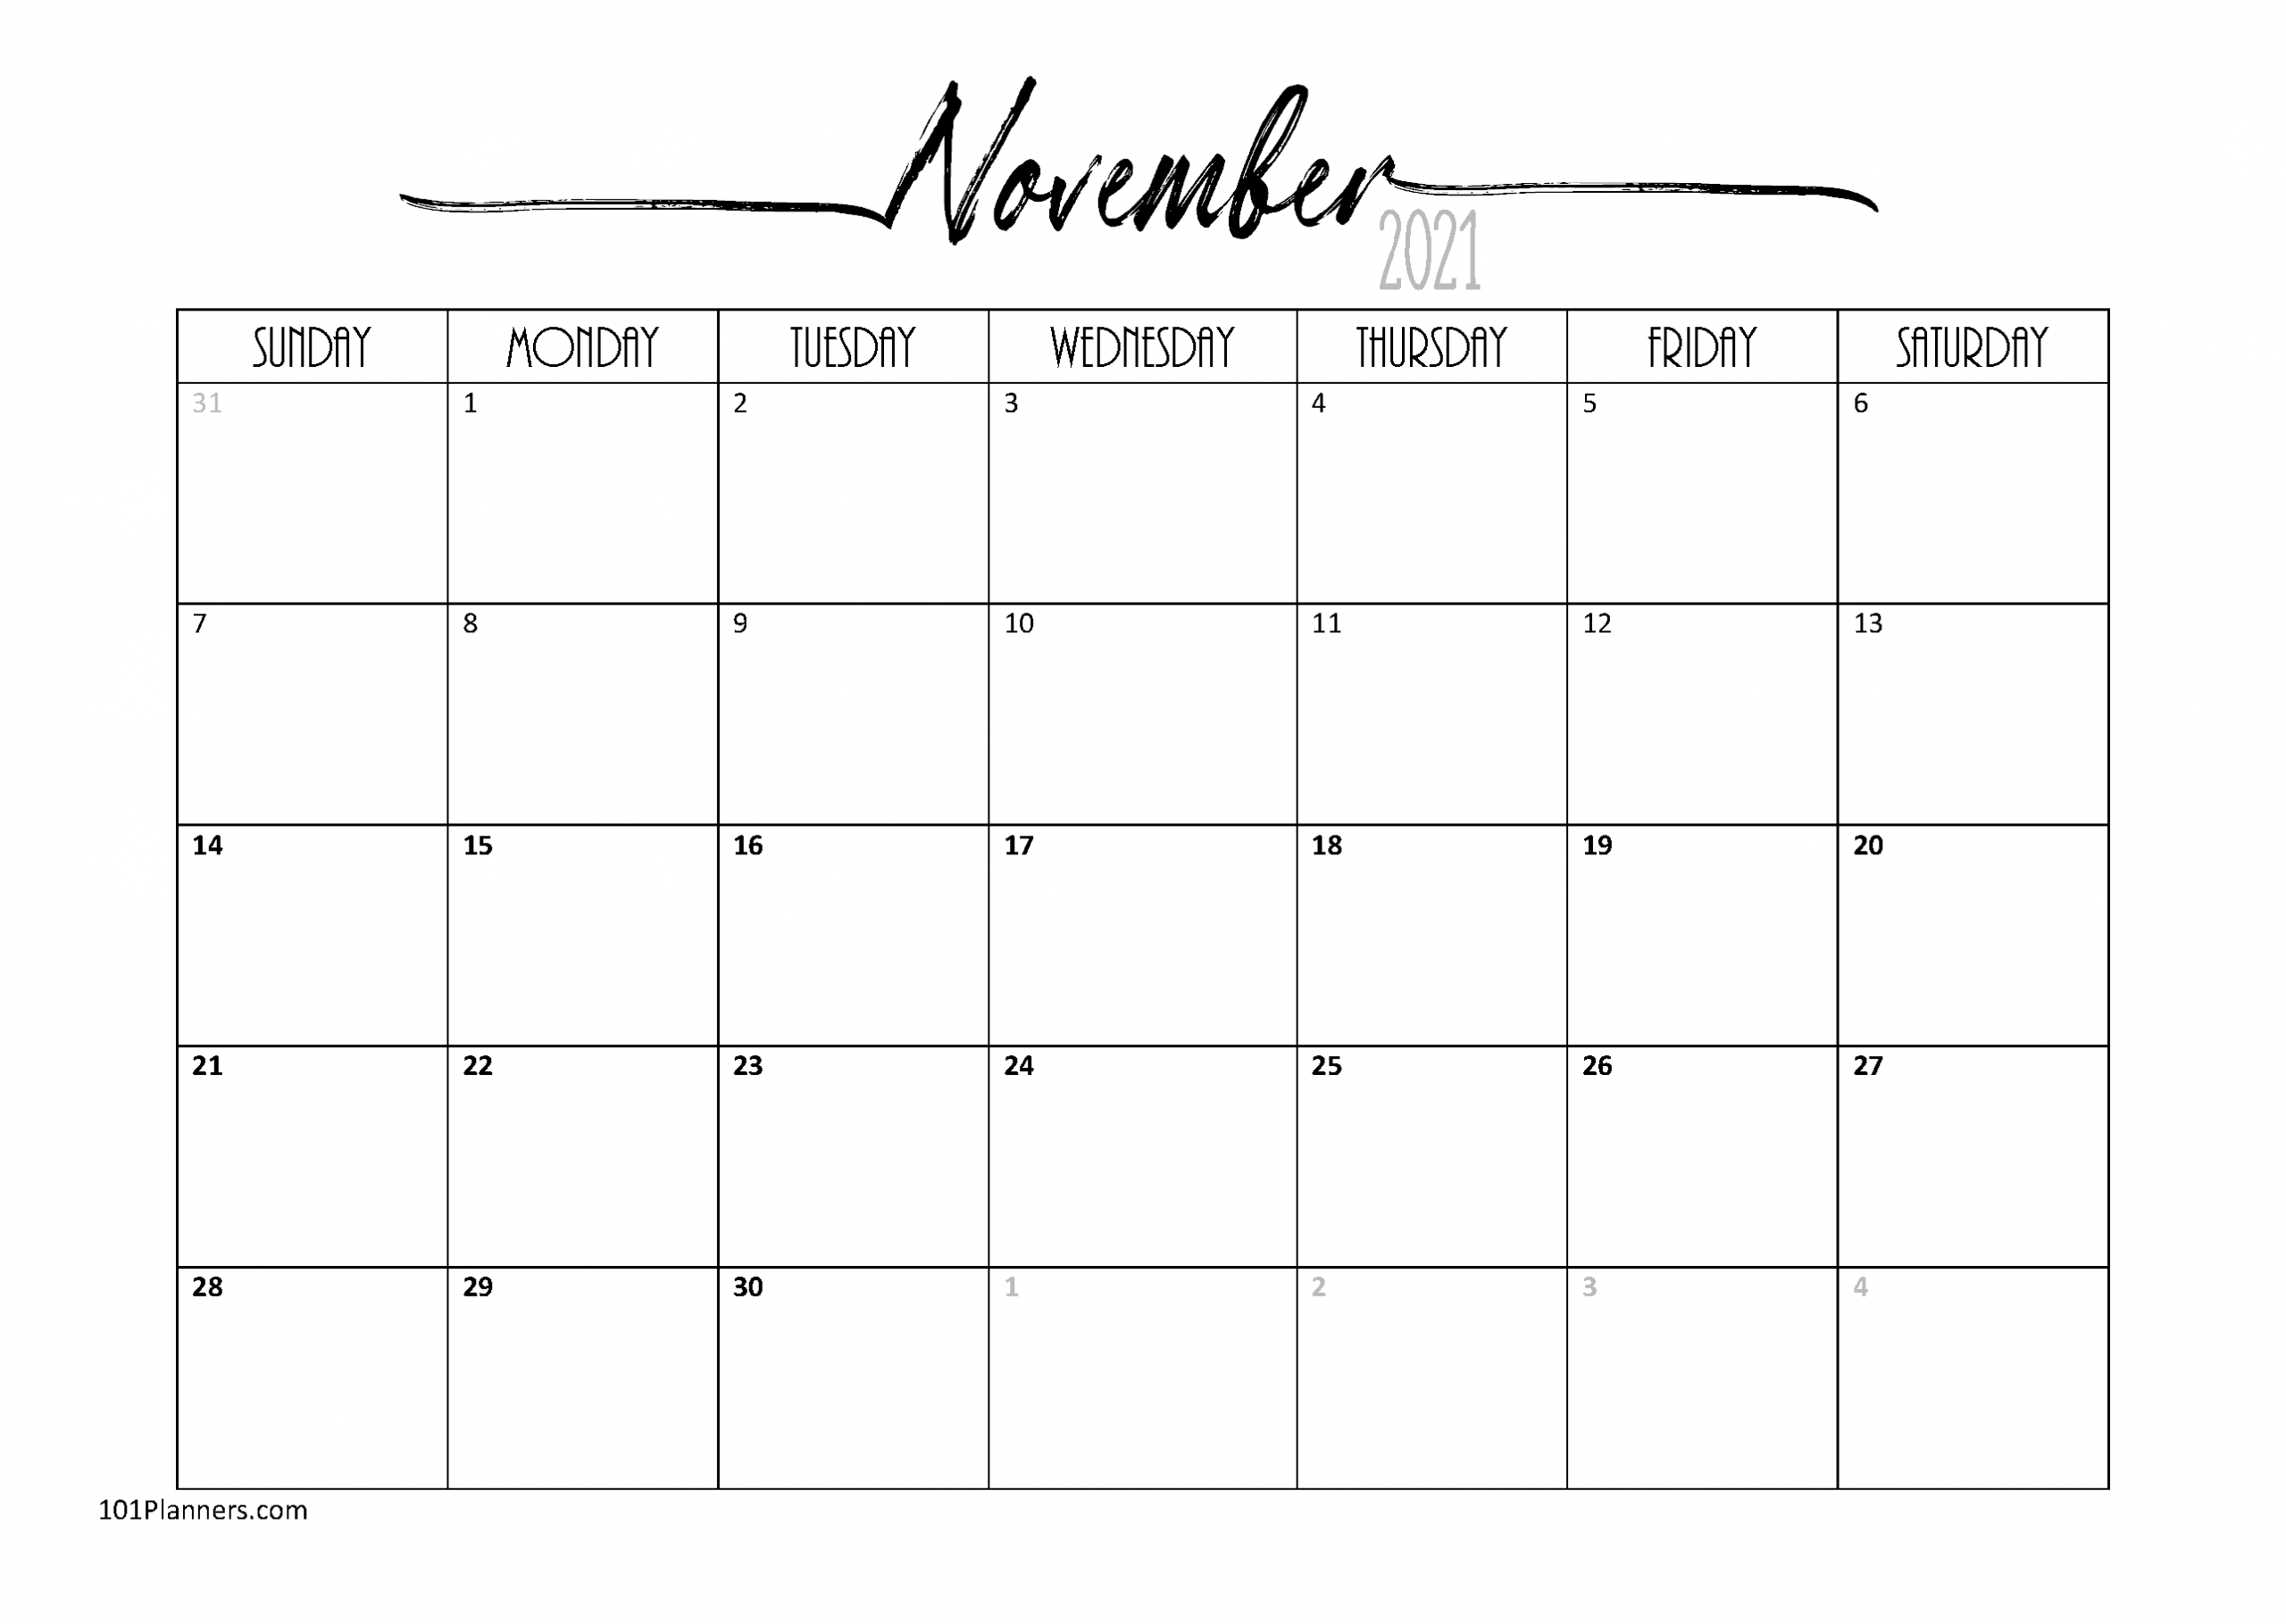 Free Blank Calendar Templates | Word, Excel, Pdf For Any Month Printable Calendar November 2020 To January 2021